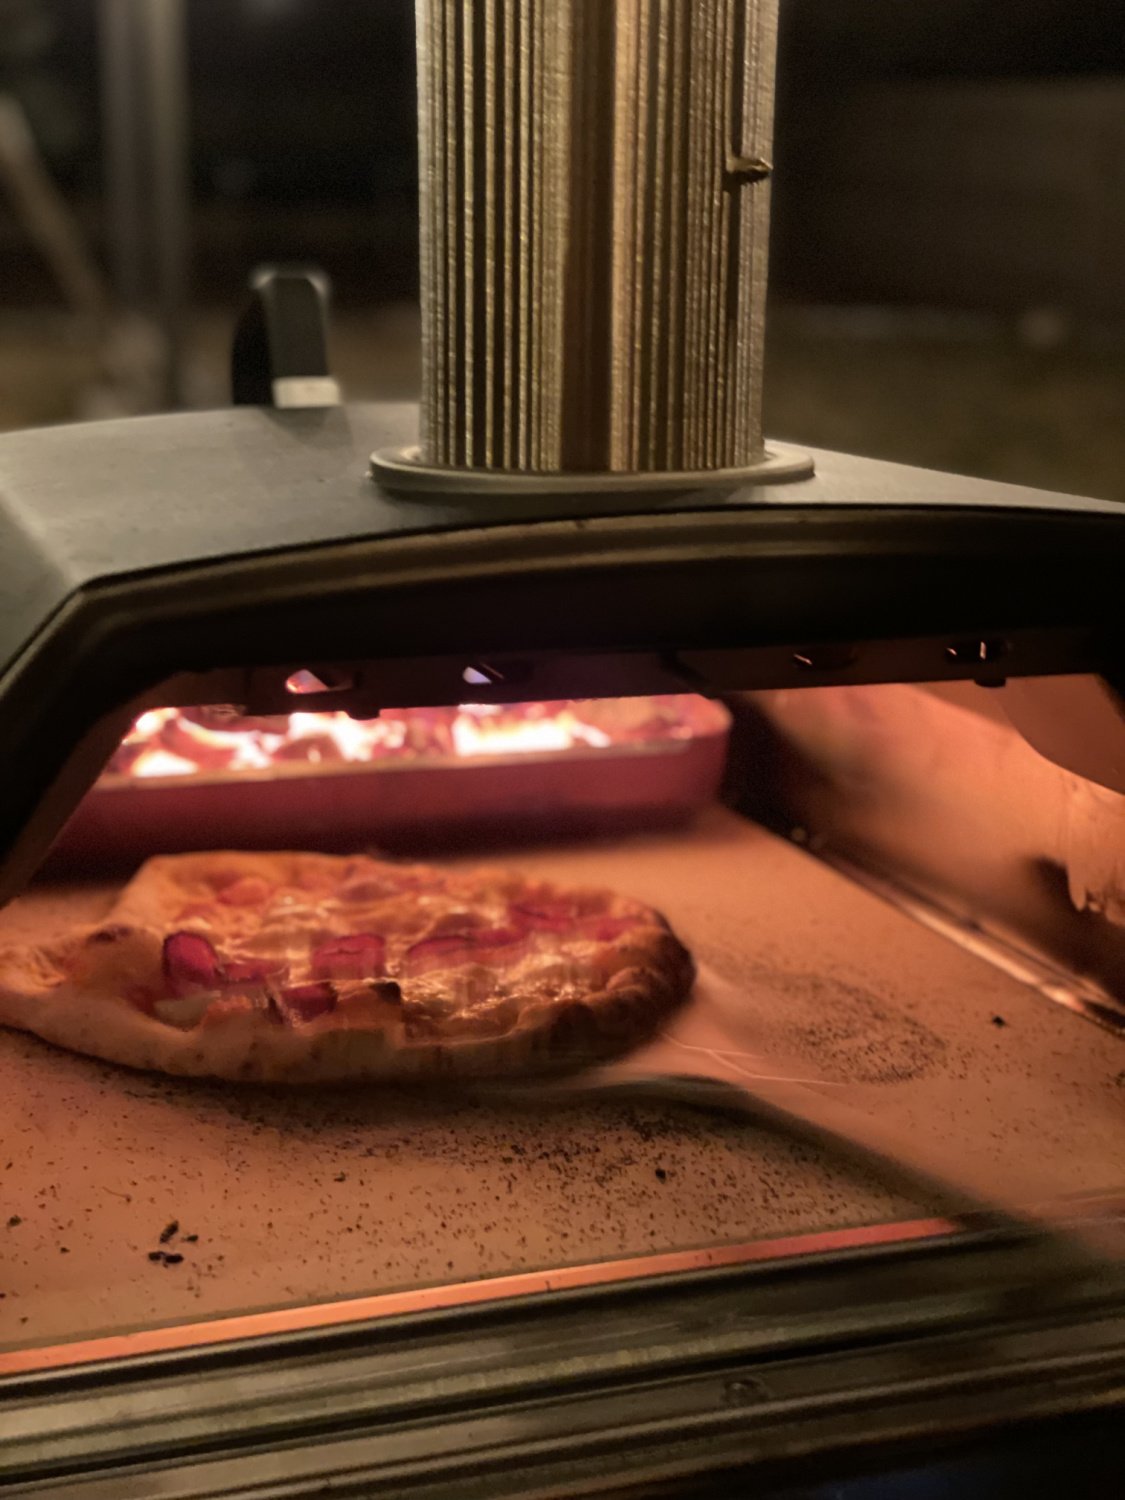 Ooni Fyra 12 Review: A Portable Pizza Oven That's Fun, but Quirky